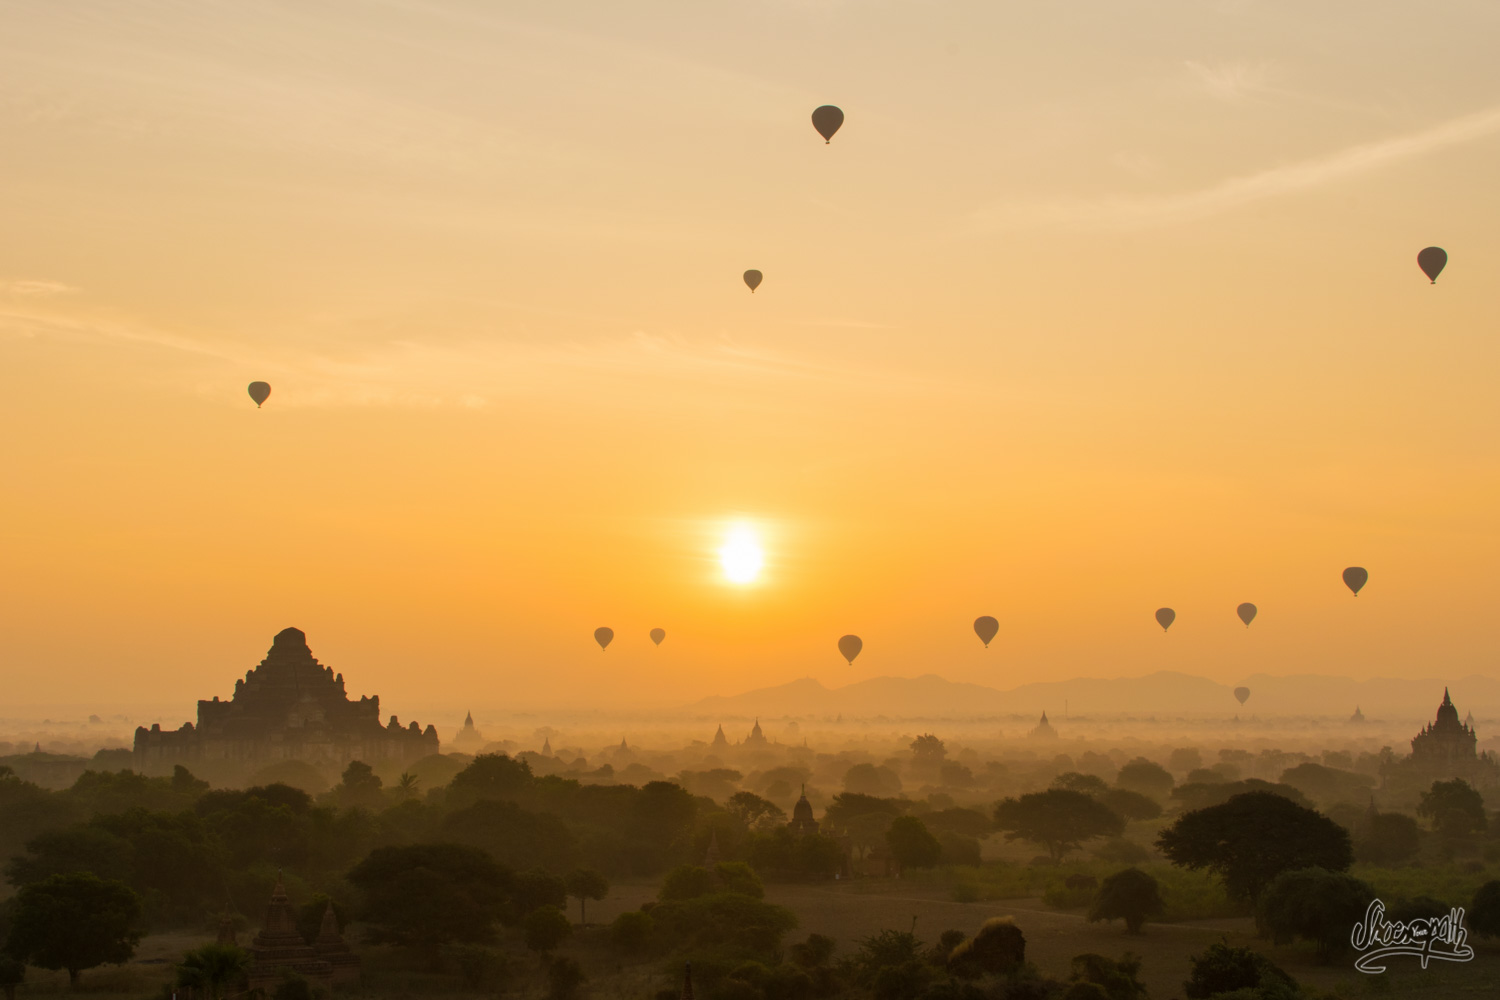 Let the show begin ! Hot air ballons flying over the pagodas of Bagan during sunrise.